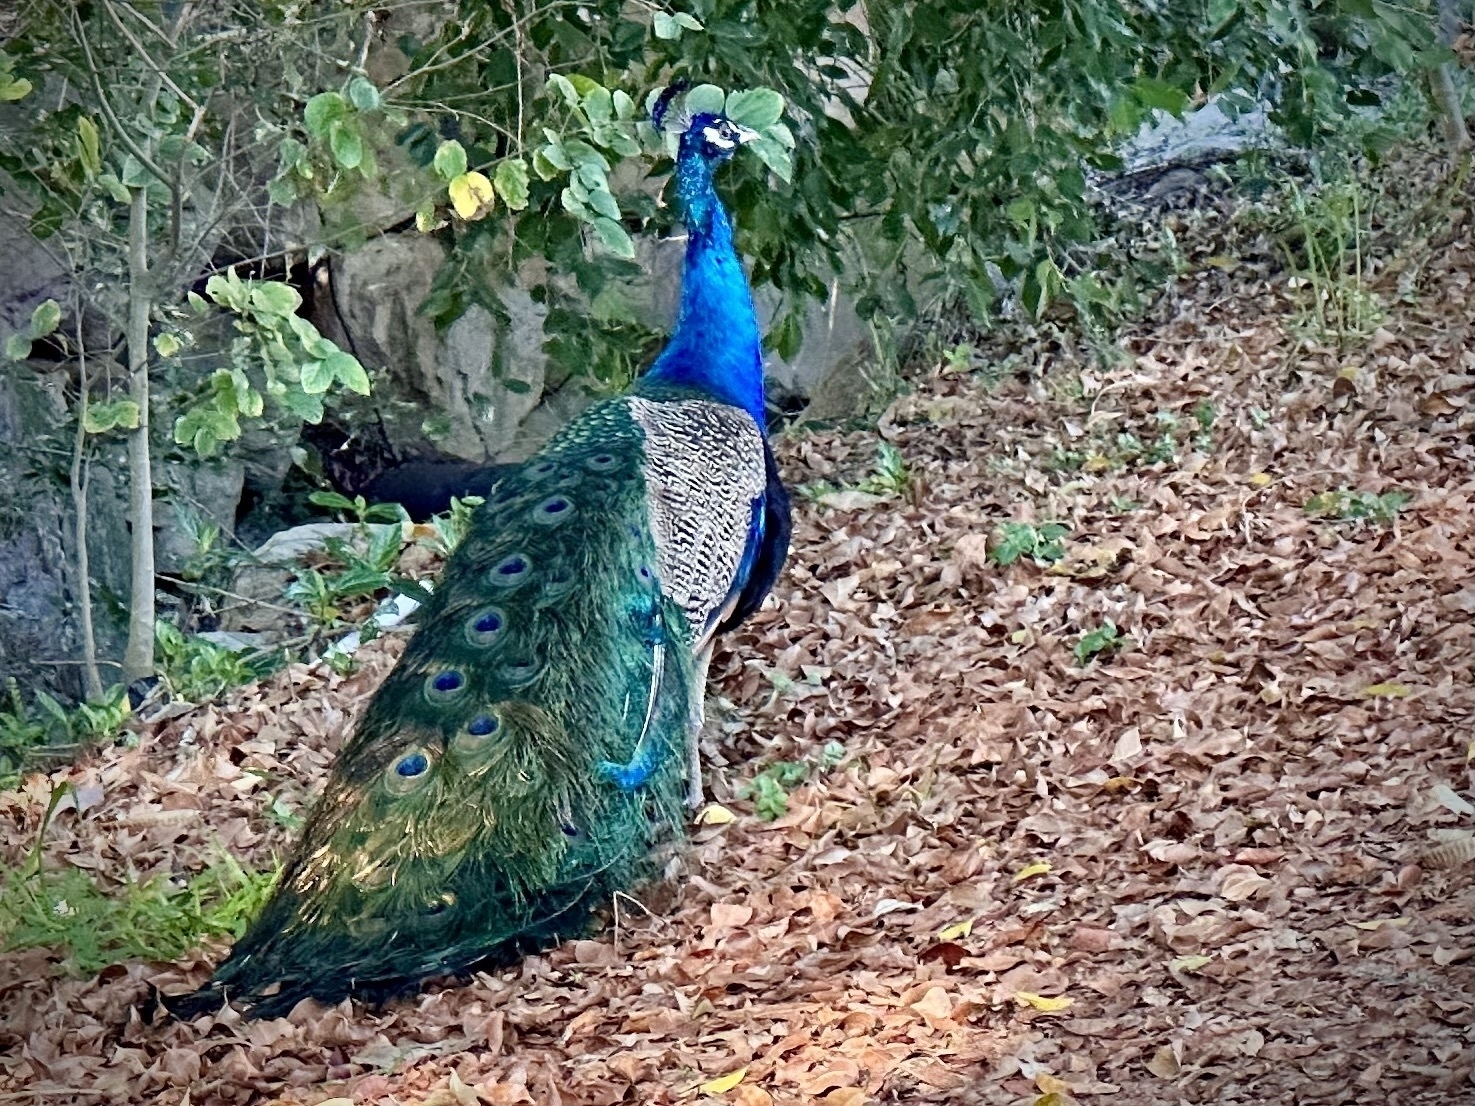 A peacock wandering a leaf covered path.